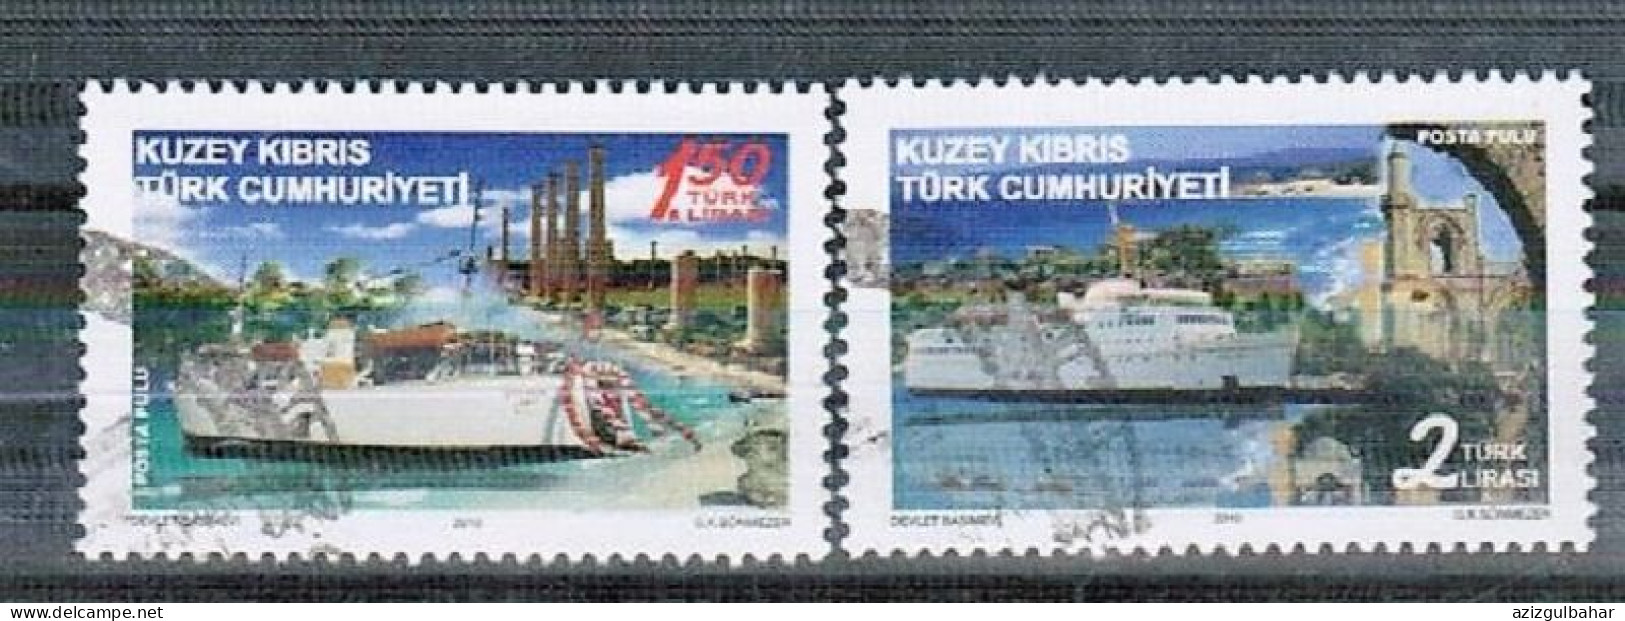 2010 - CRUISING SHIPS - TRANSPORTATION - TURKISH CYPRIOT STAMPS - STAMPS - USED - Used Stamps